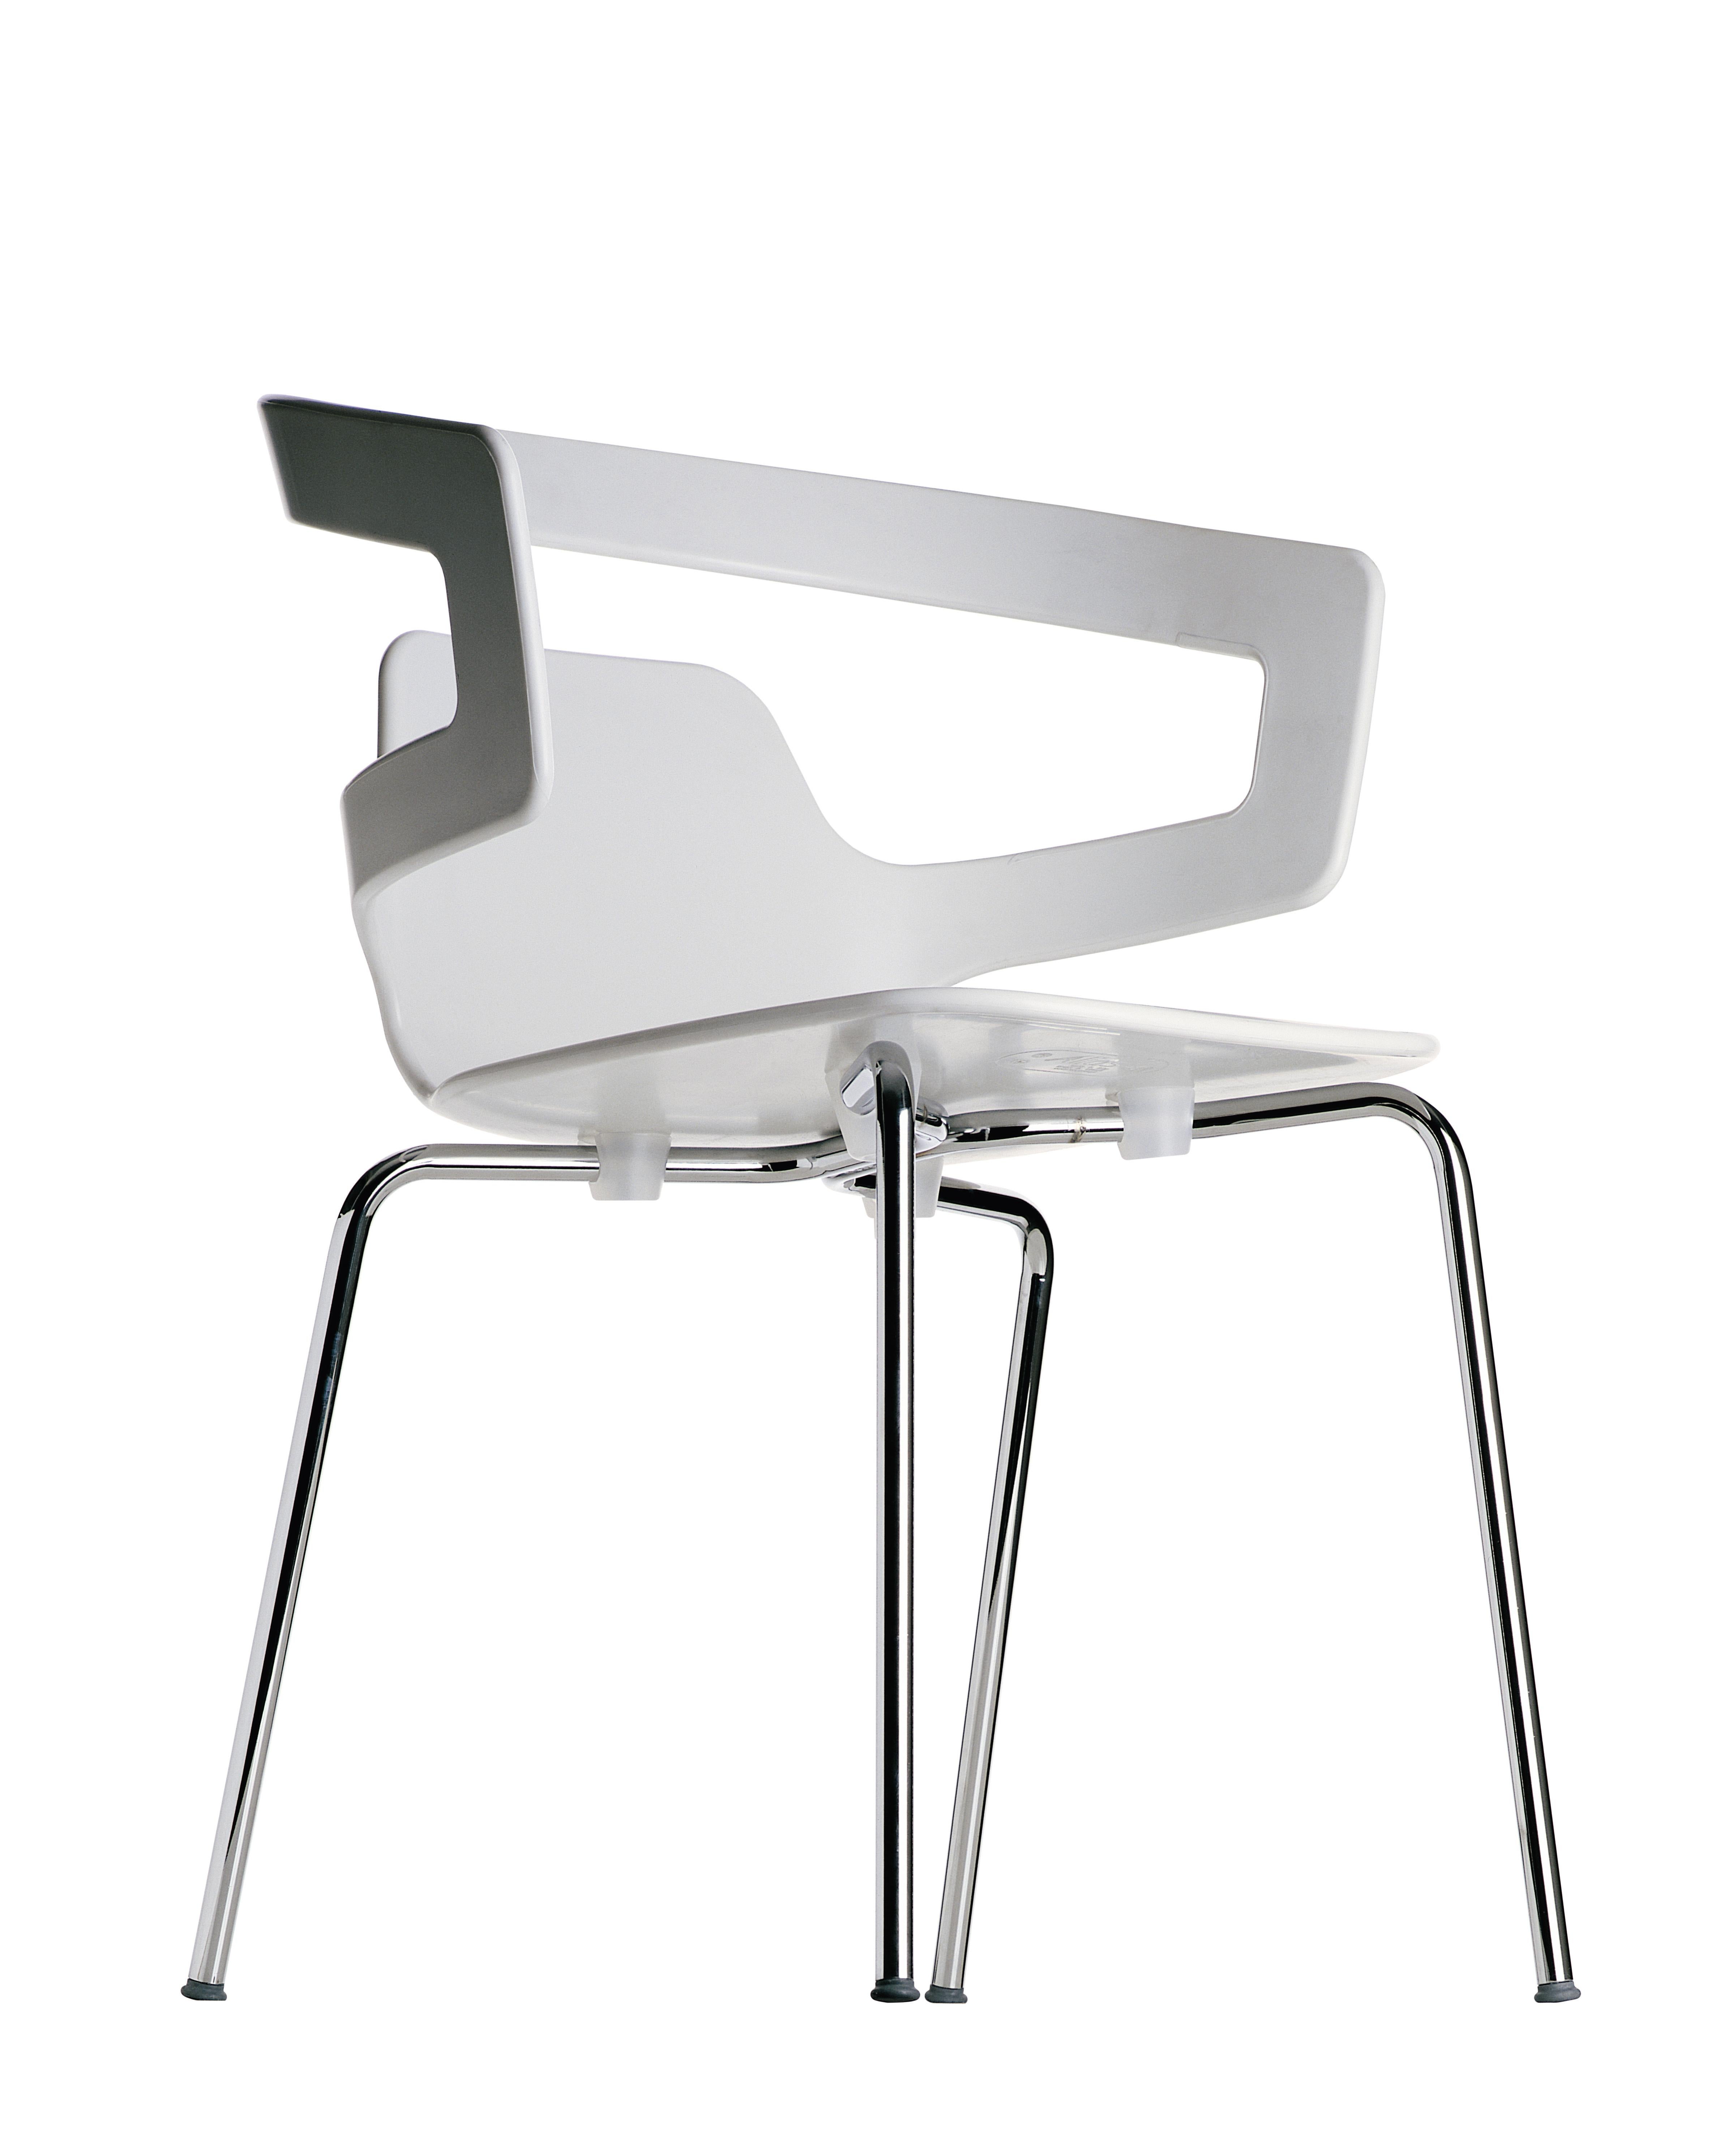 Alias 500 Segesta Chair in White Seat and Chromed Steel Frame by Alfredo Häberli In New Condition For Sale In Brooklyn, NY